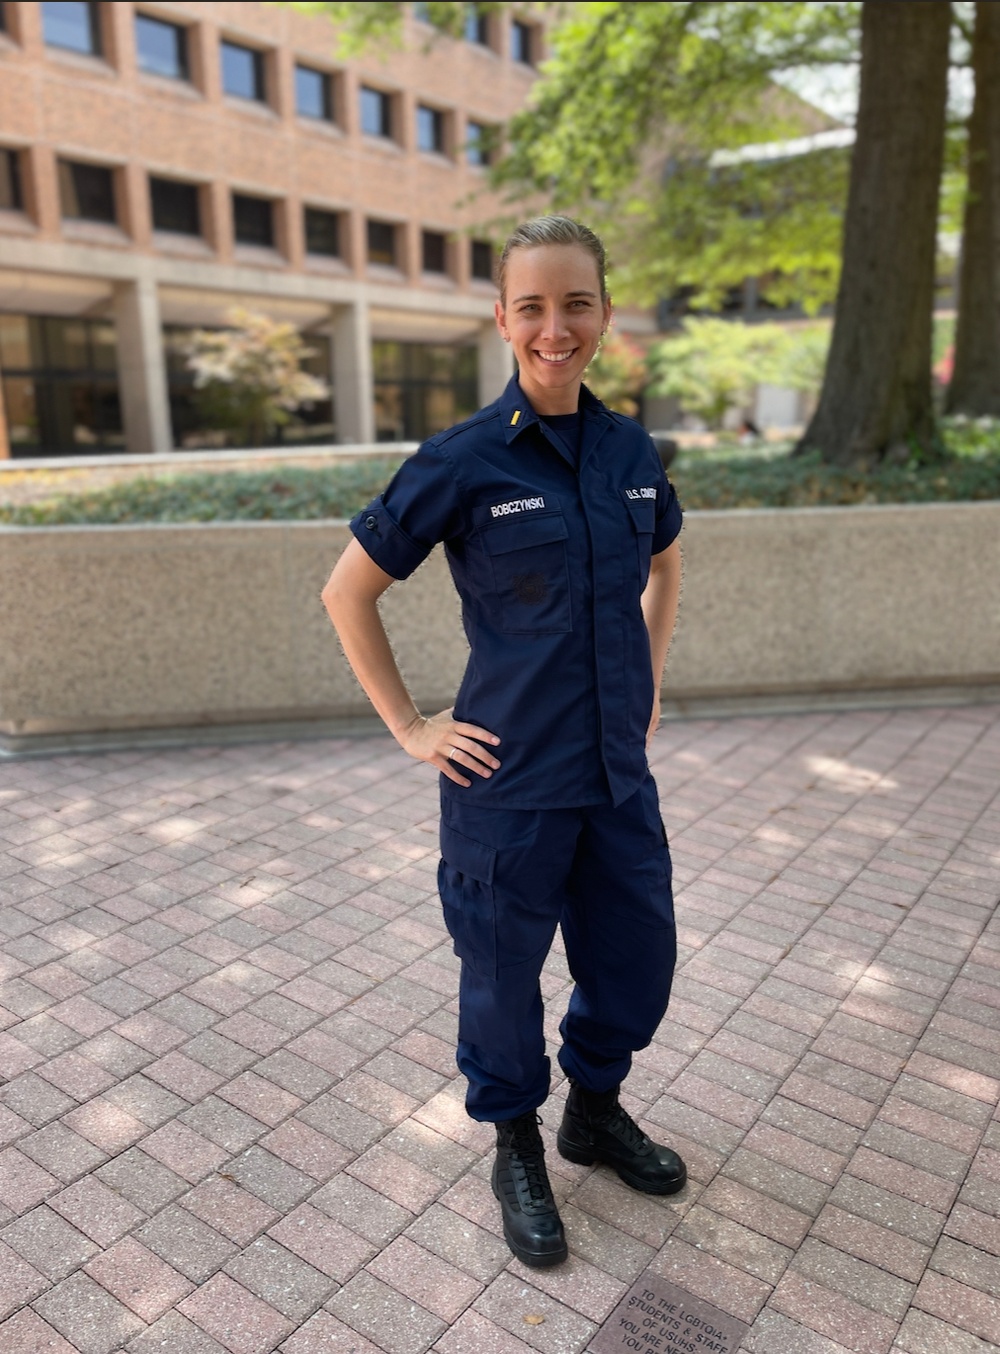 For First U.S. Coast Guard-sponsored USU Medical Student, Persistence is Key to Success